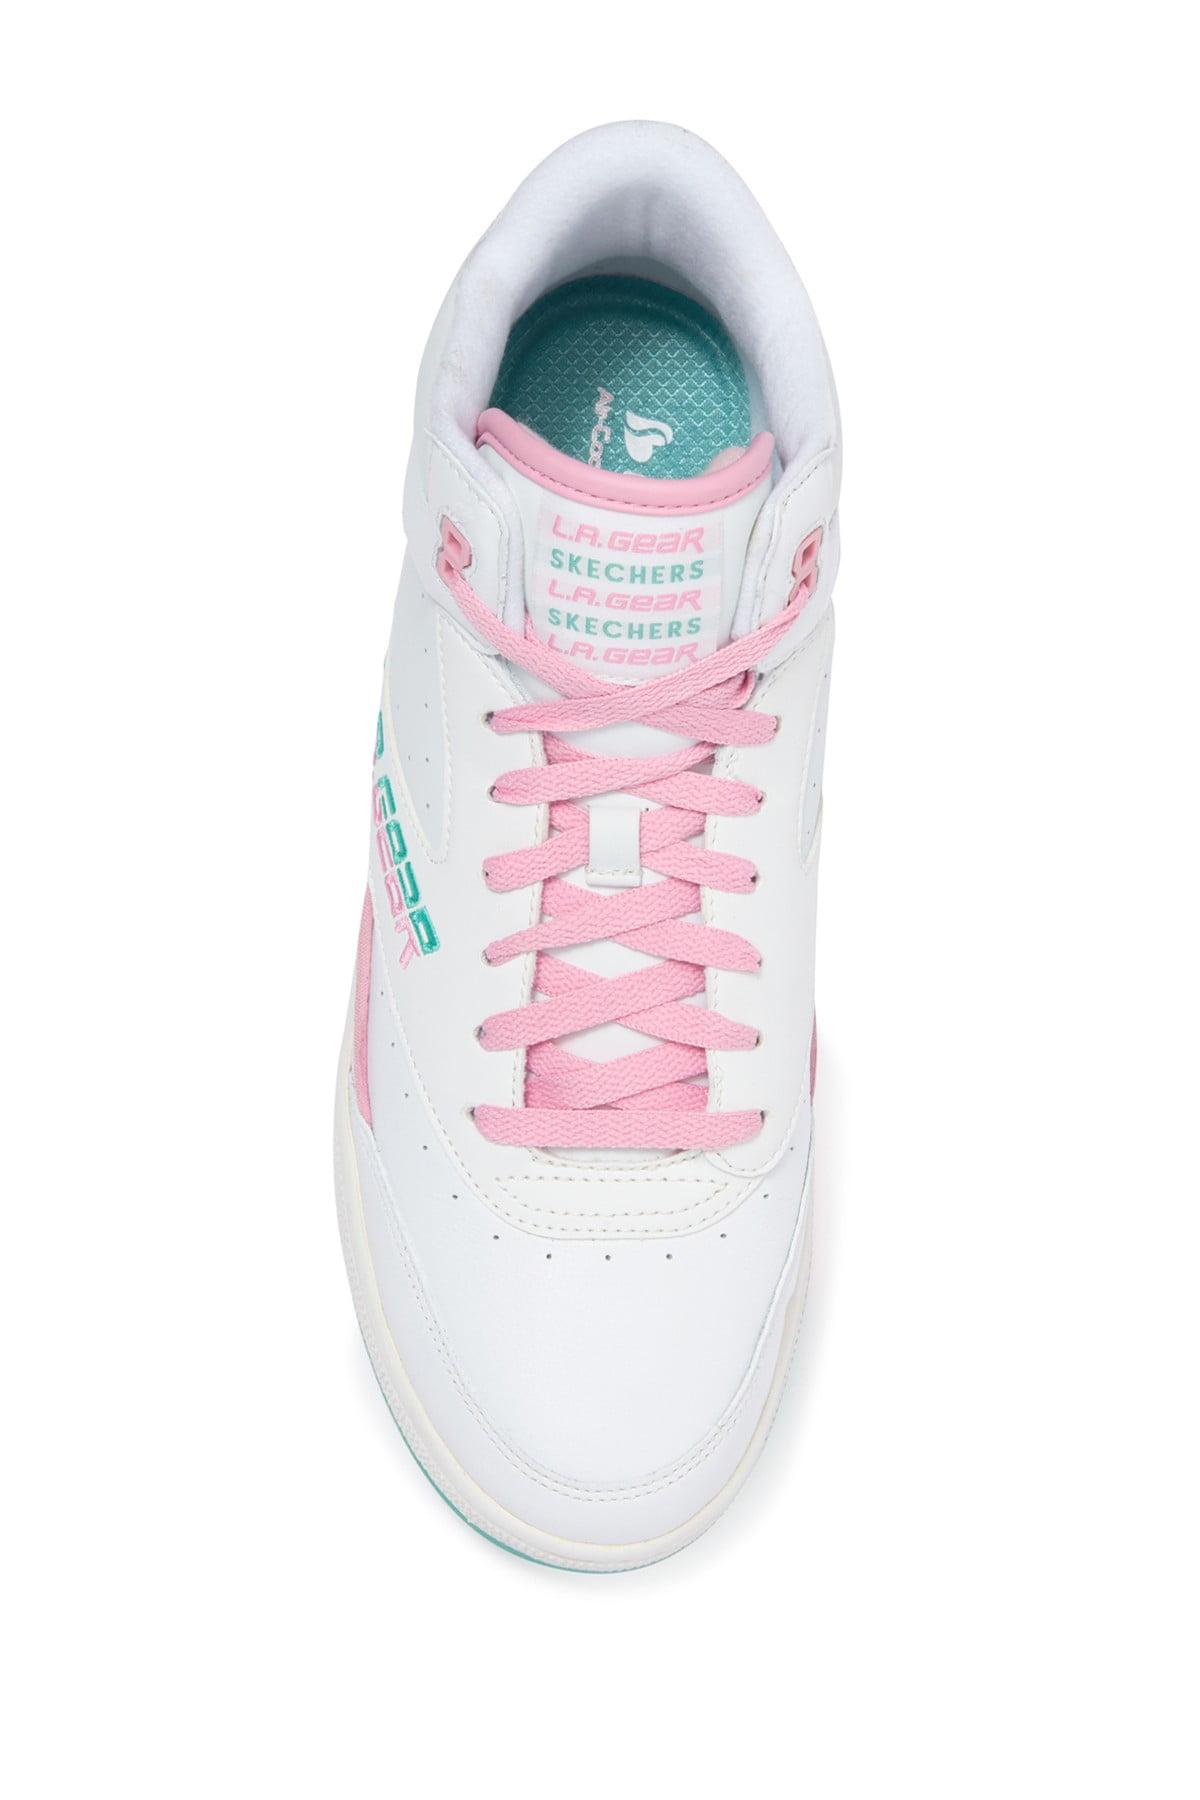 Skechers L.A. Gear Retro Pink and White High Top Sneakers Size 10 - $49  (42% Off Retail) - From Lauren